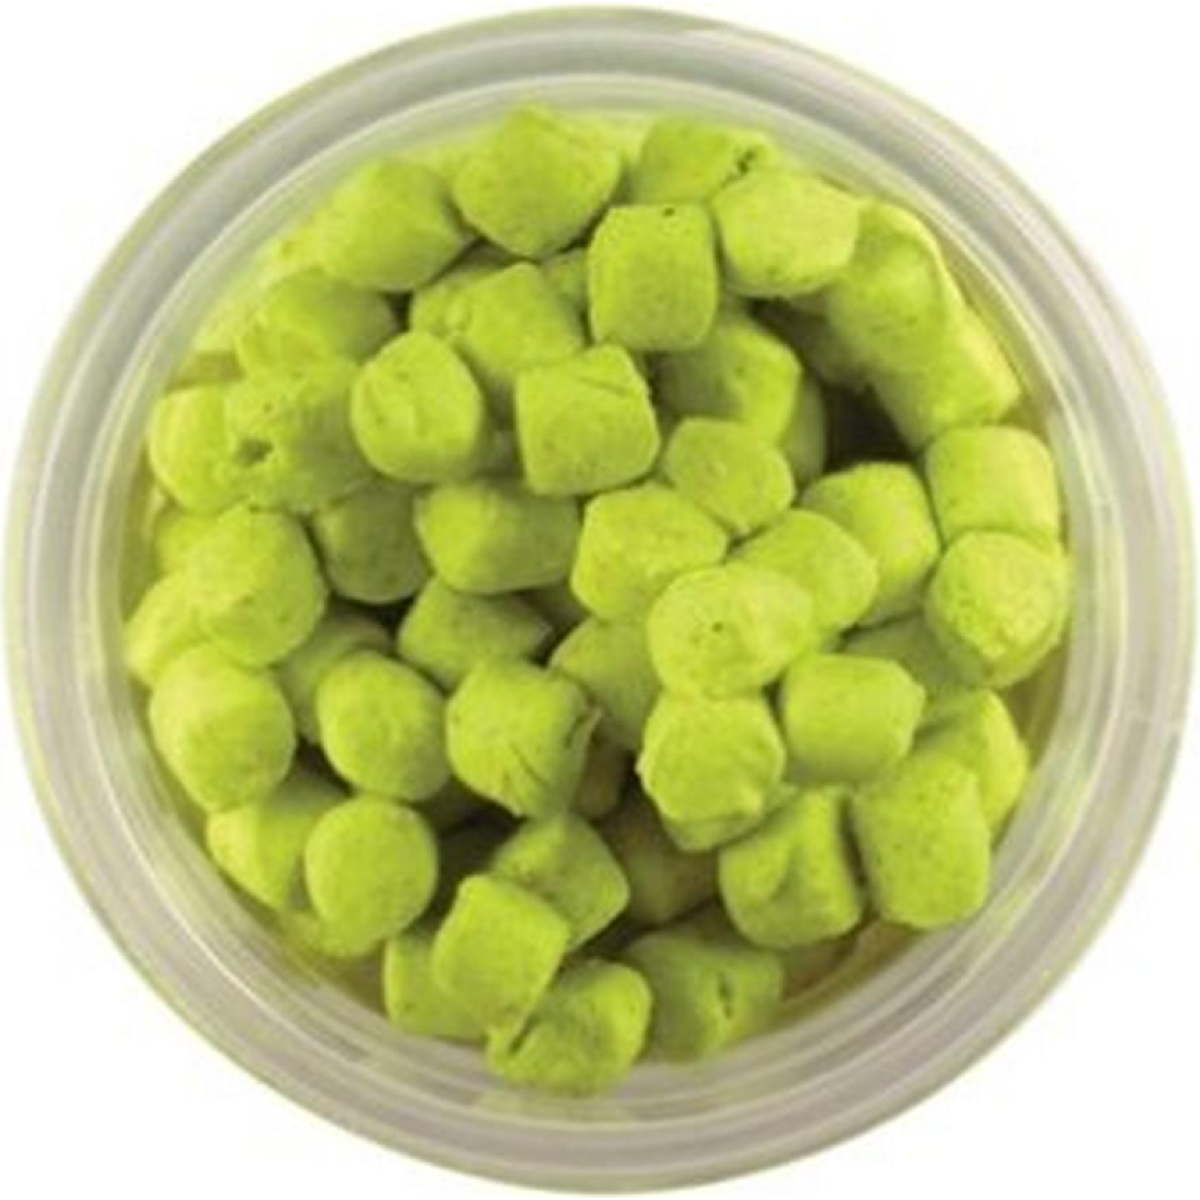 Photo of Berkley PowerBait Chroma-Glow Crappie Nibbles for sale at United Tackle Shops.